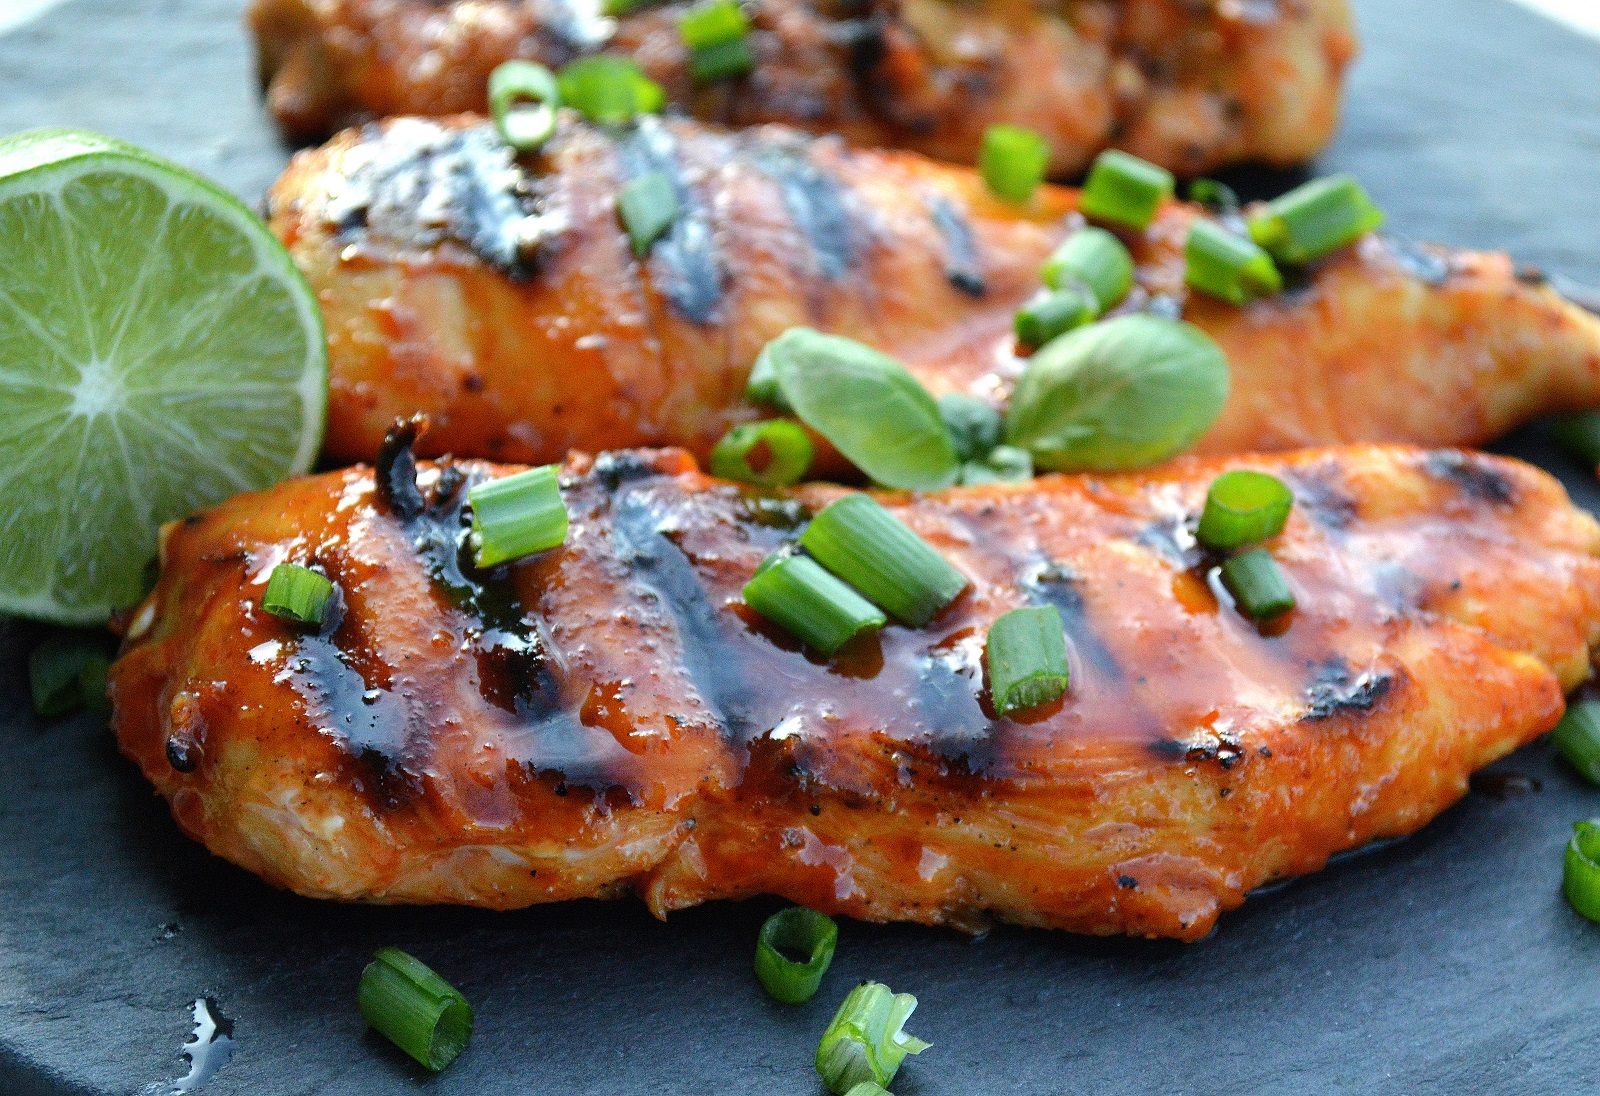 Sriracha Chicken Recipe - Great to grill and an easy weeknight meal!